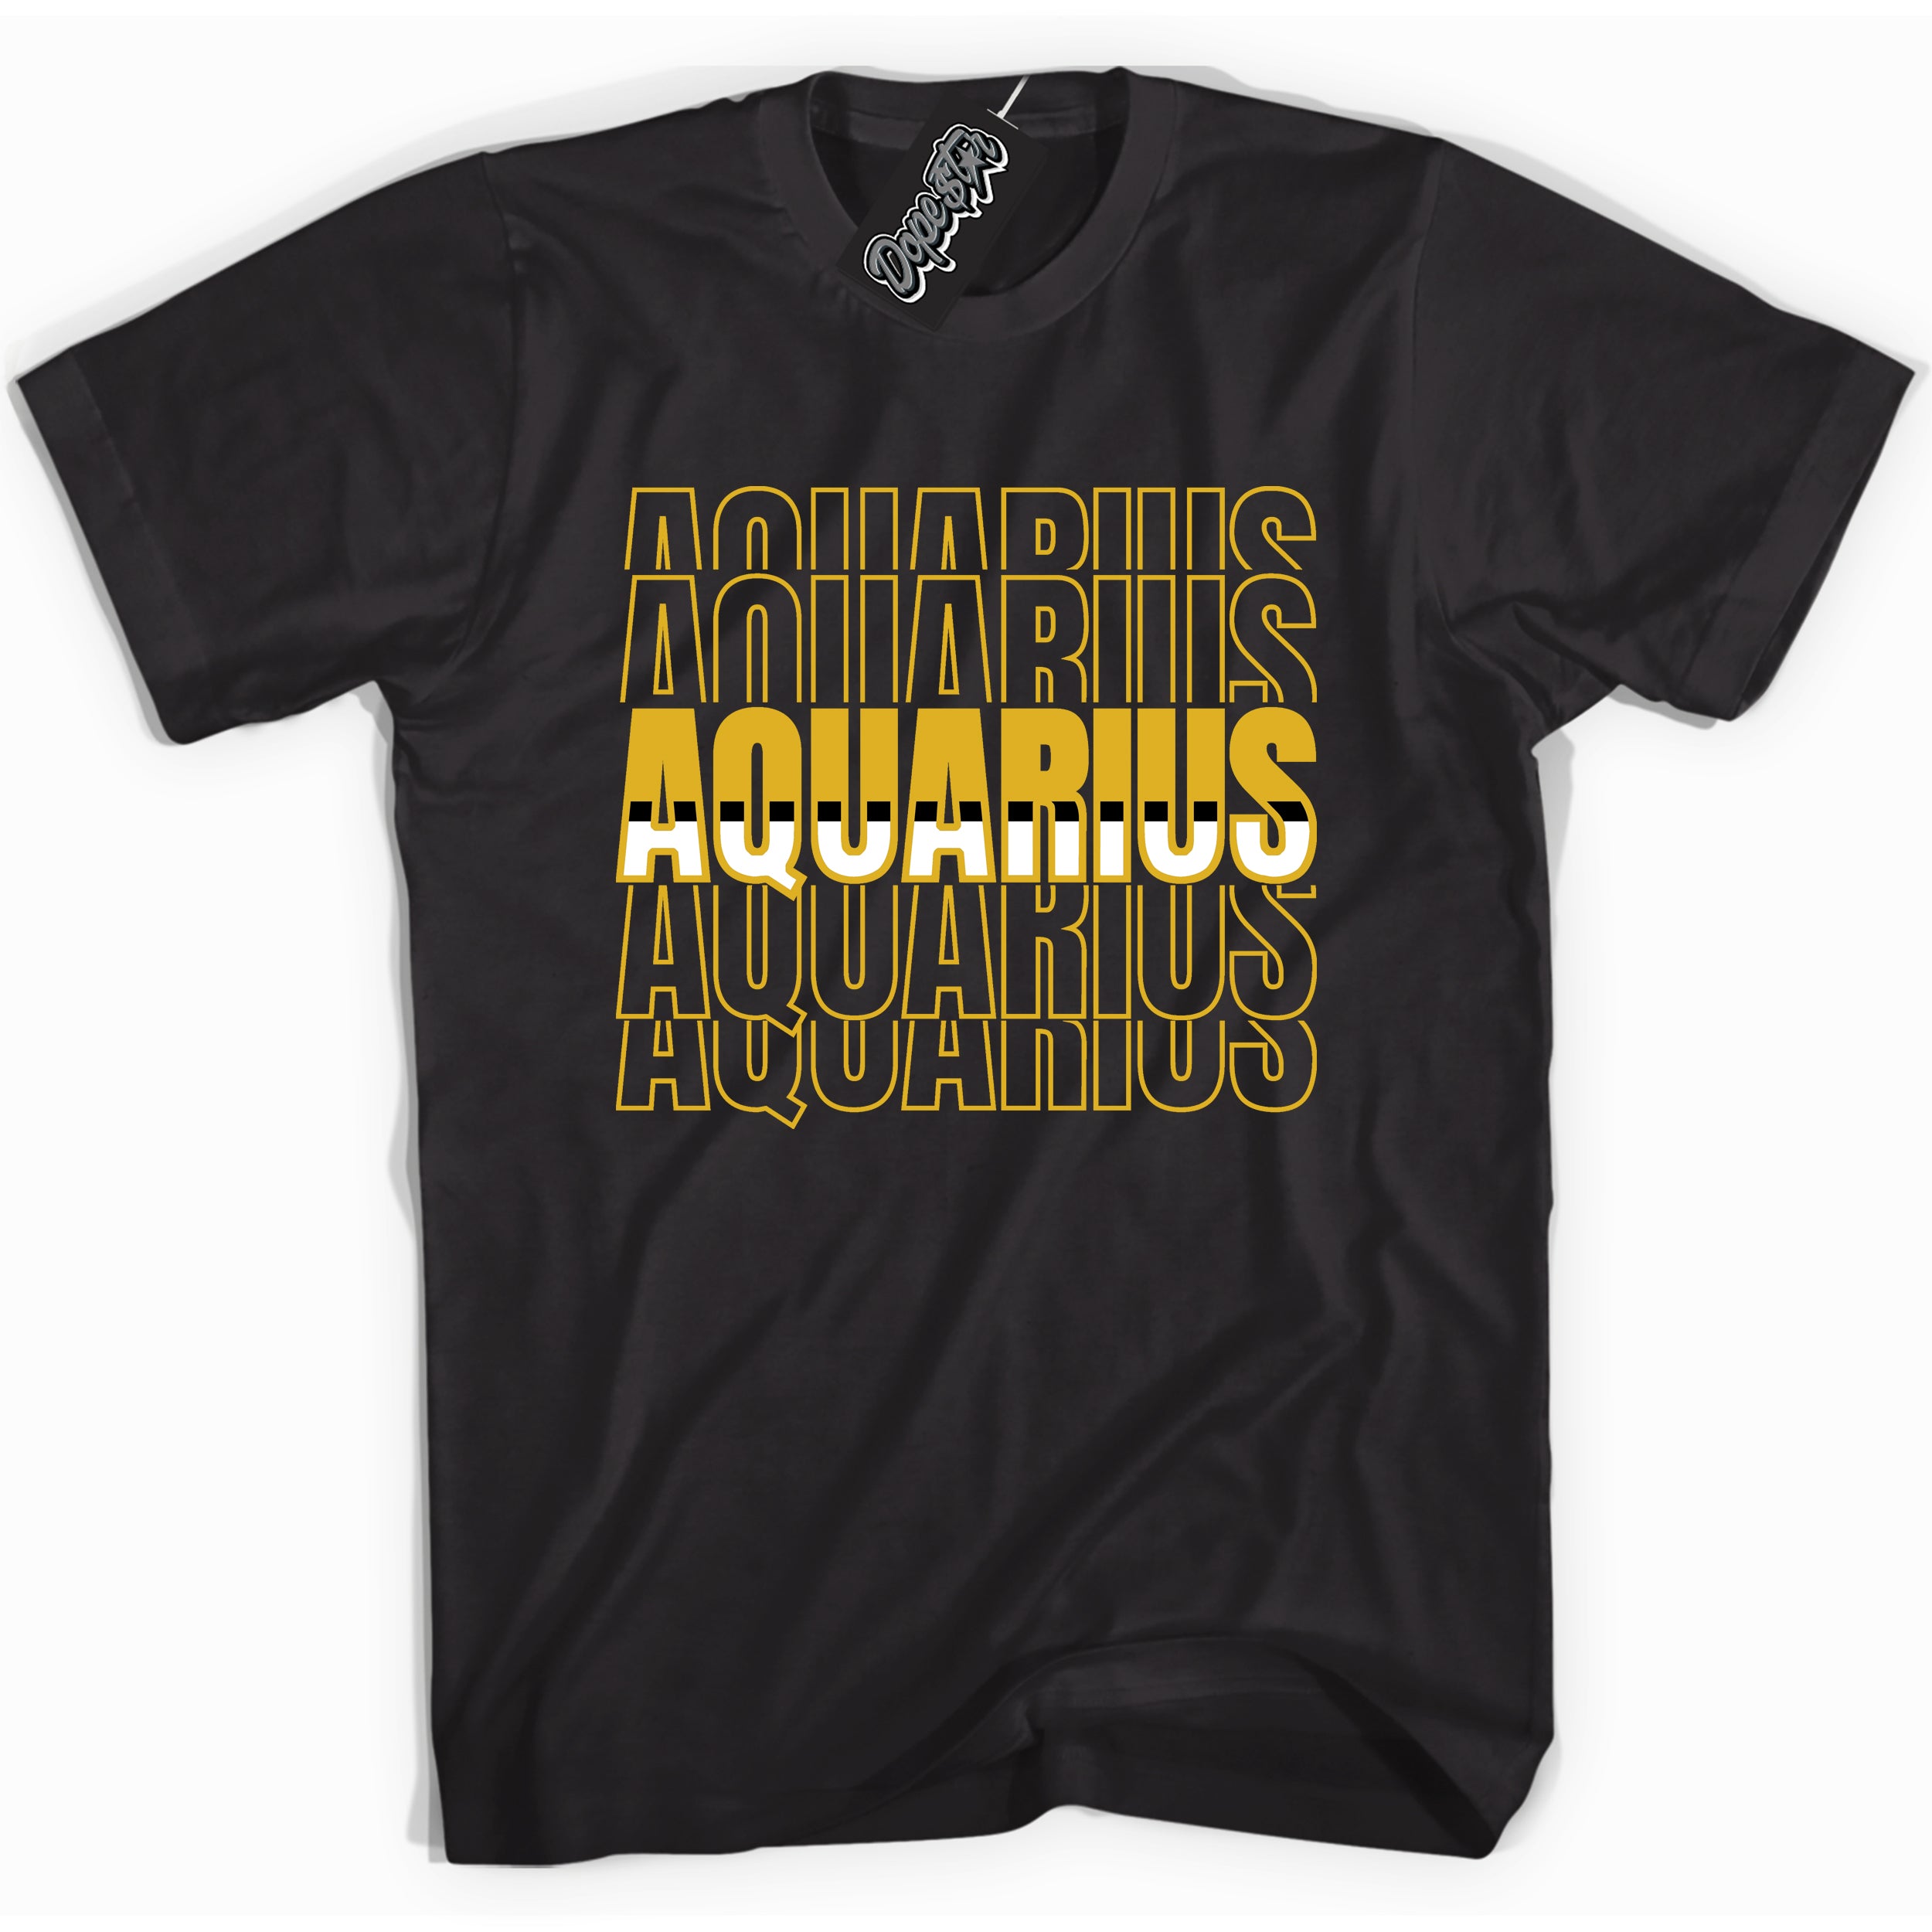 Cool Black Shirt With Aquarius design That Perfectly Matches YELLOW OCHRE 6s Sneakers.